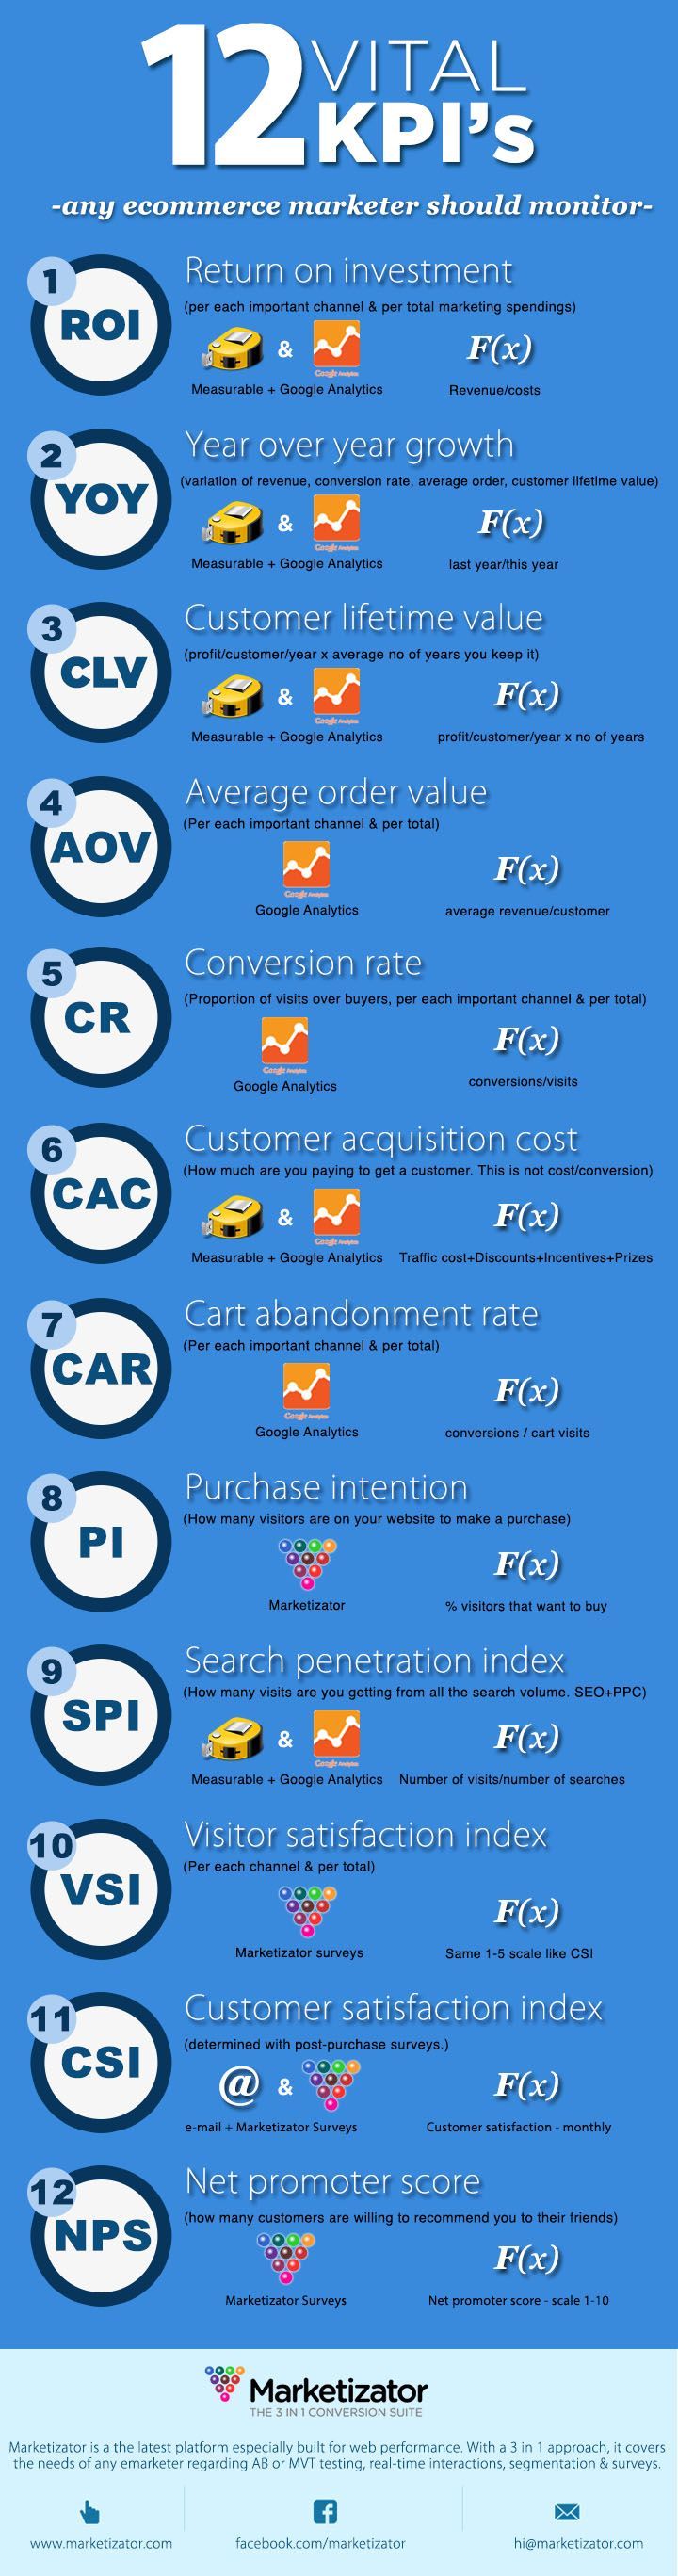 Psychology-Infographic-5-KPI’s-clave-para-comercio-electronico-infografia Psychology Infographic : 5 KPI’s clave para comercio electrónico #infografia #infographic #ecommerce